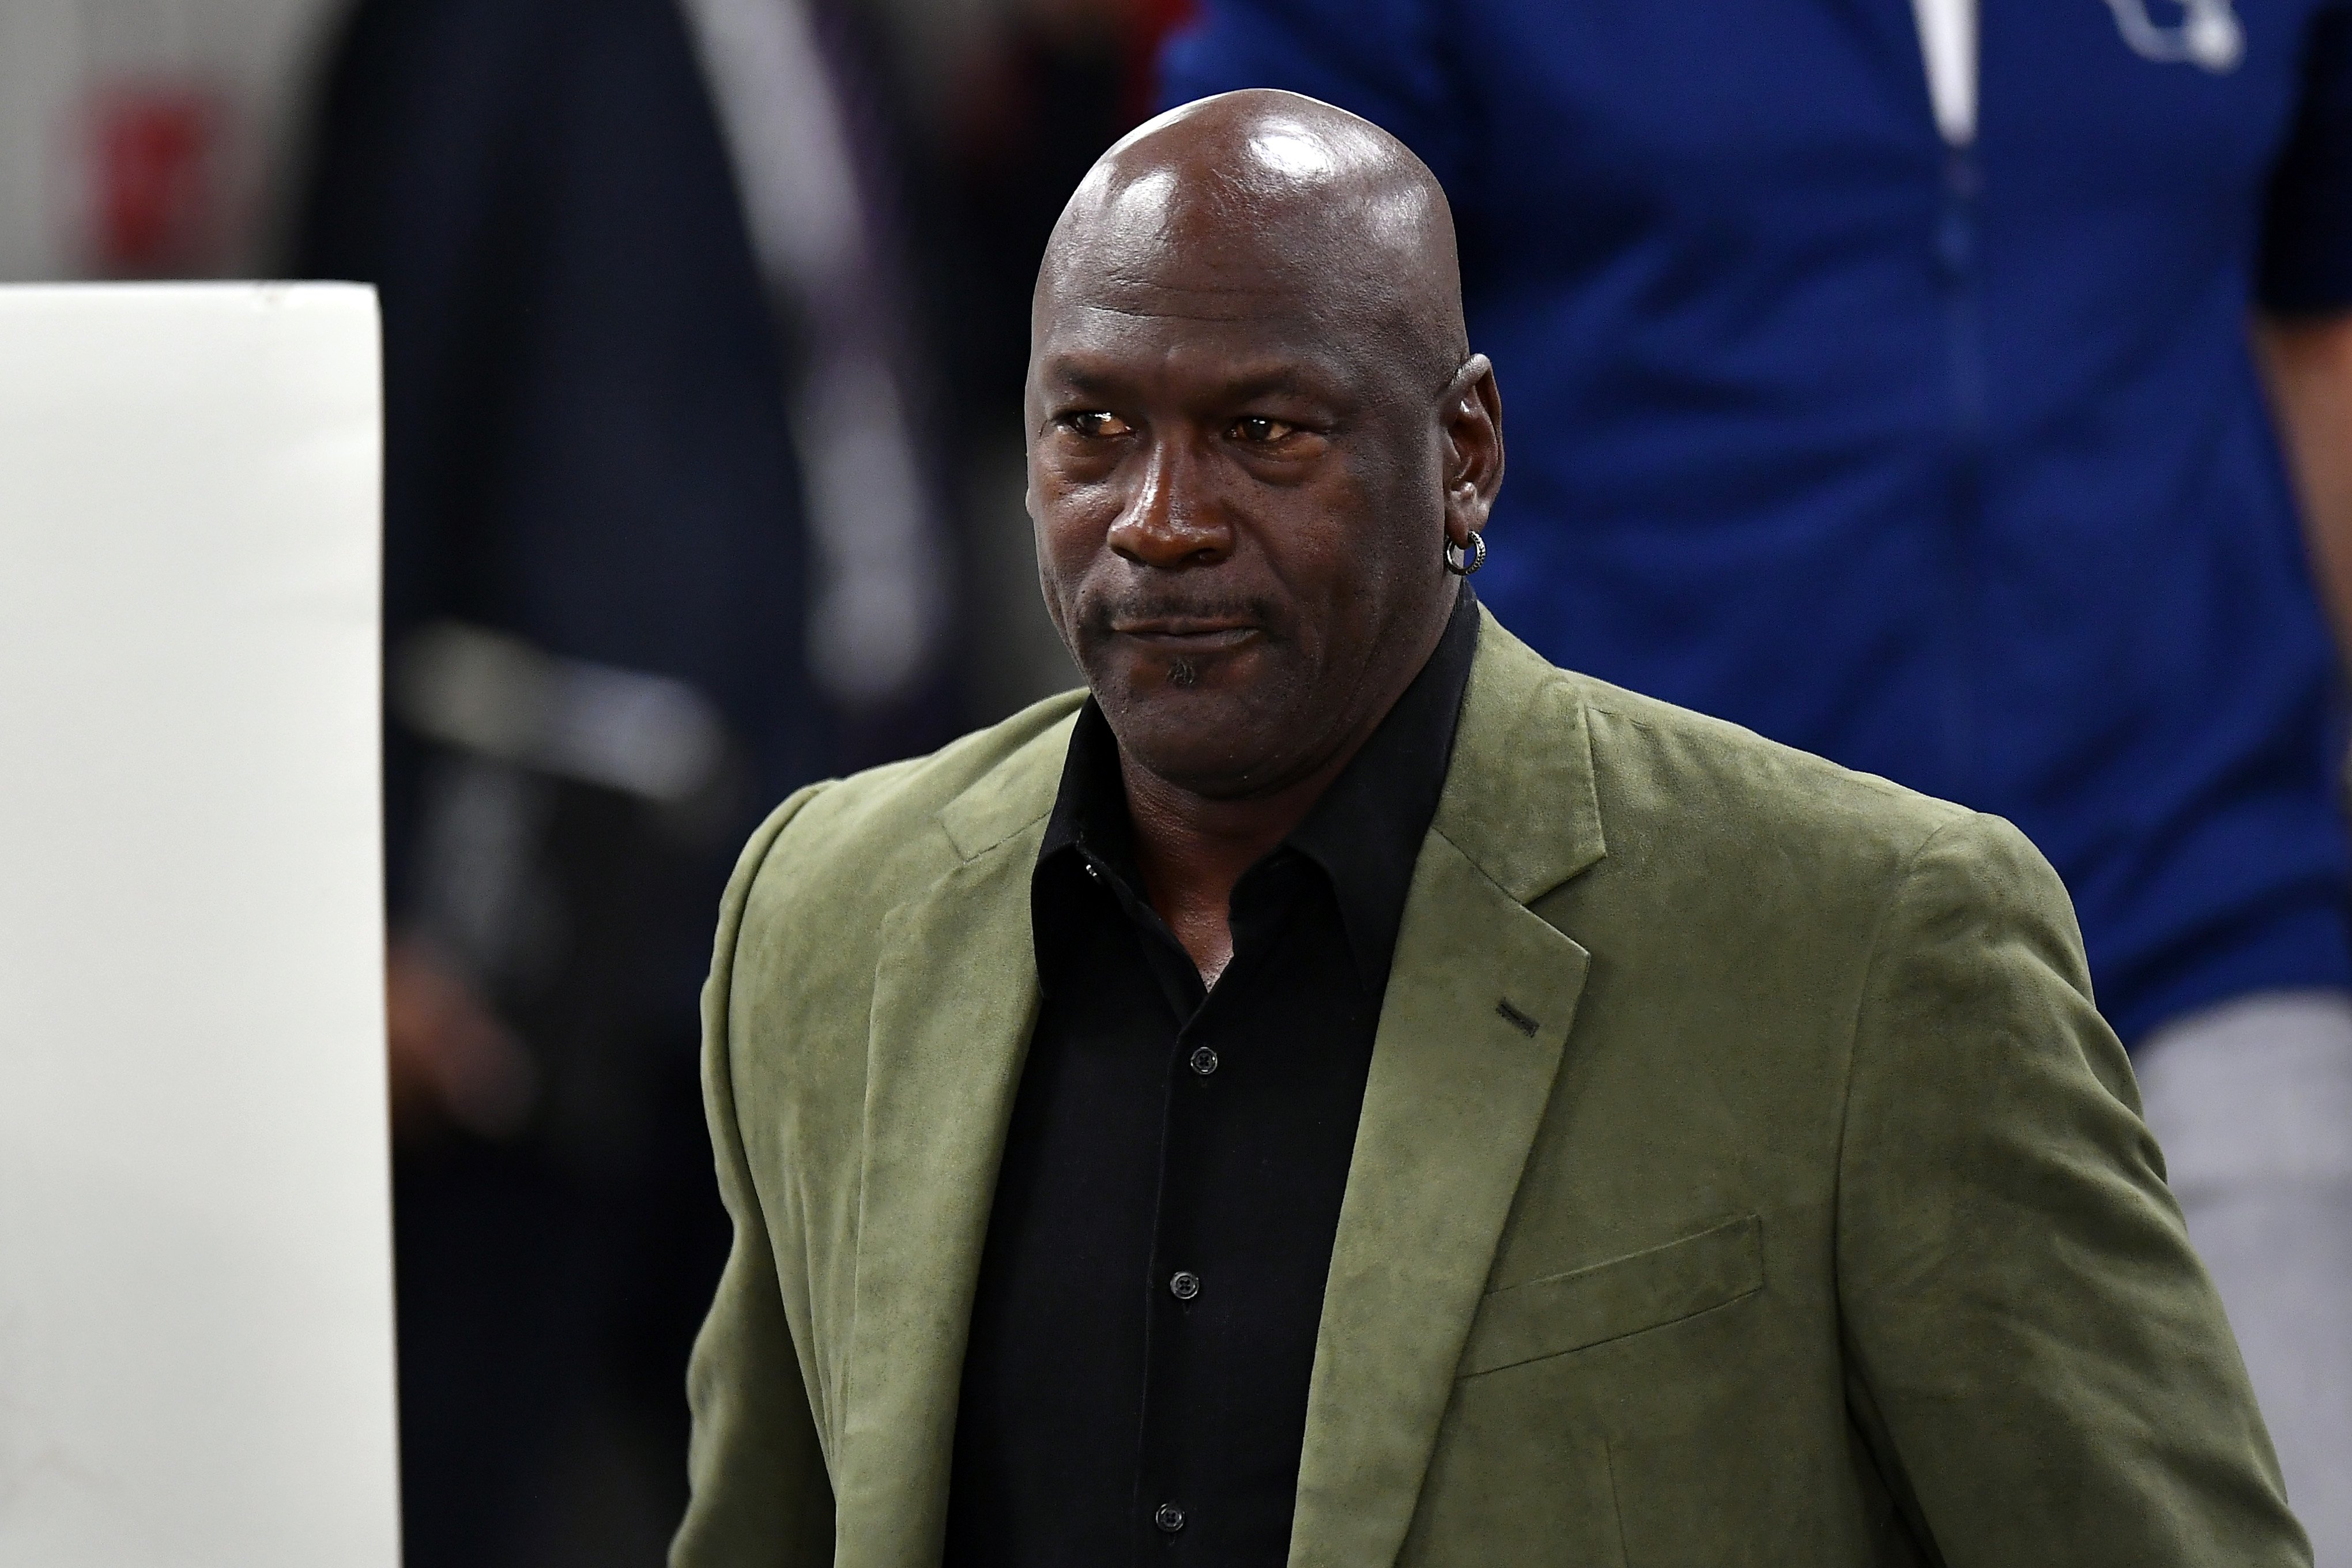 Michael Jordan at a press conference before the NBA Paris Game match between Charlotte Hornets and Milwaukee Bucks in January 2020. | Photo: Getty Images